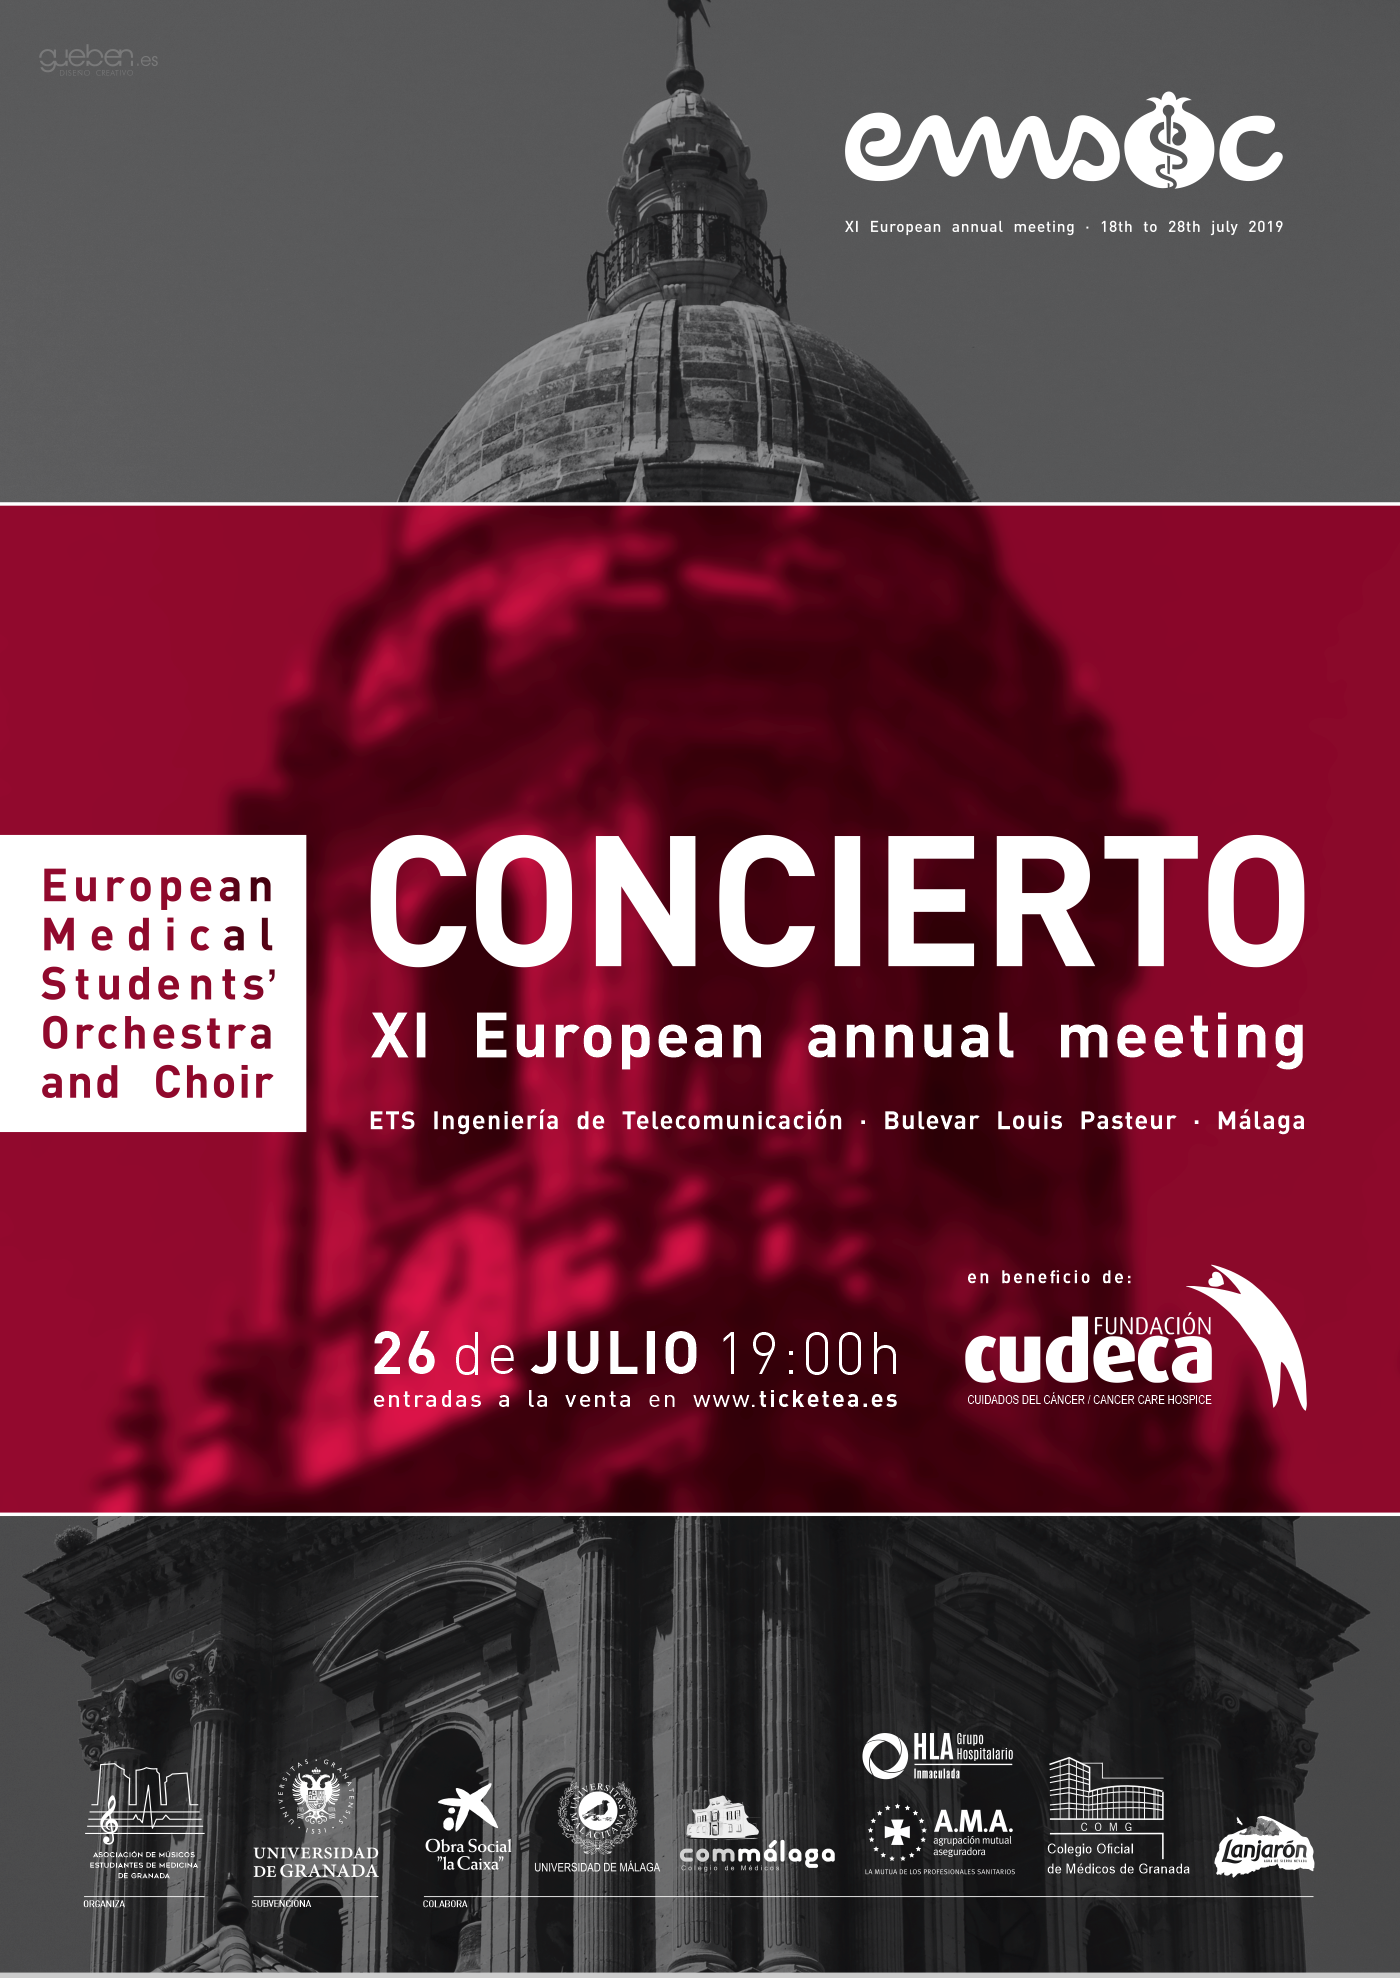 European Medical Student´s Orchestra and Choir in aid of Cudeca